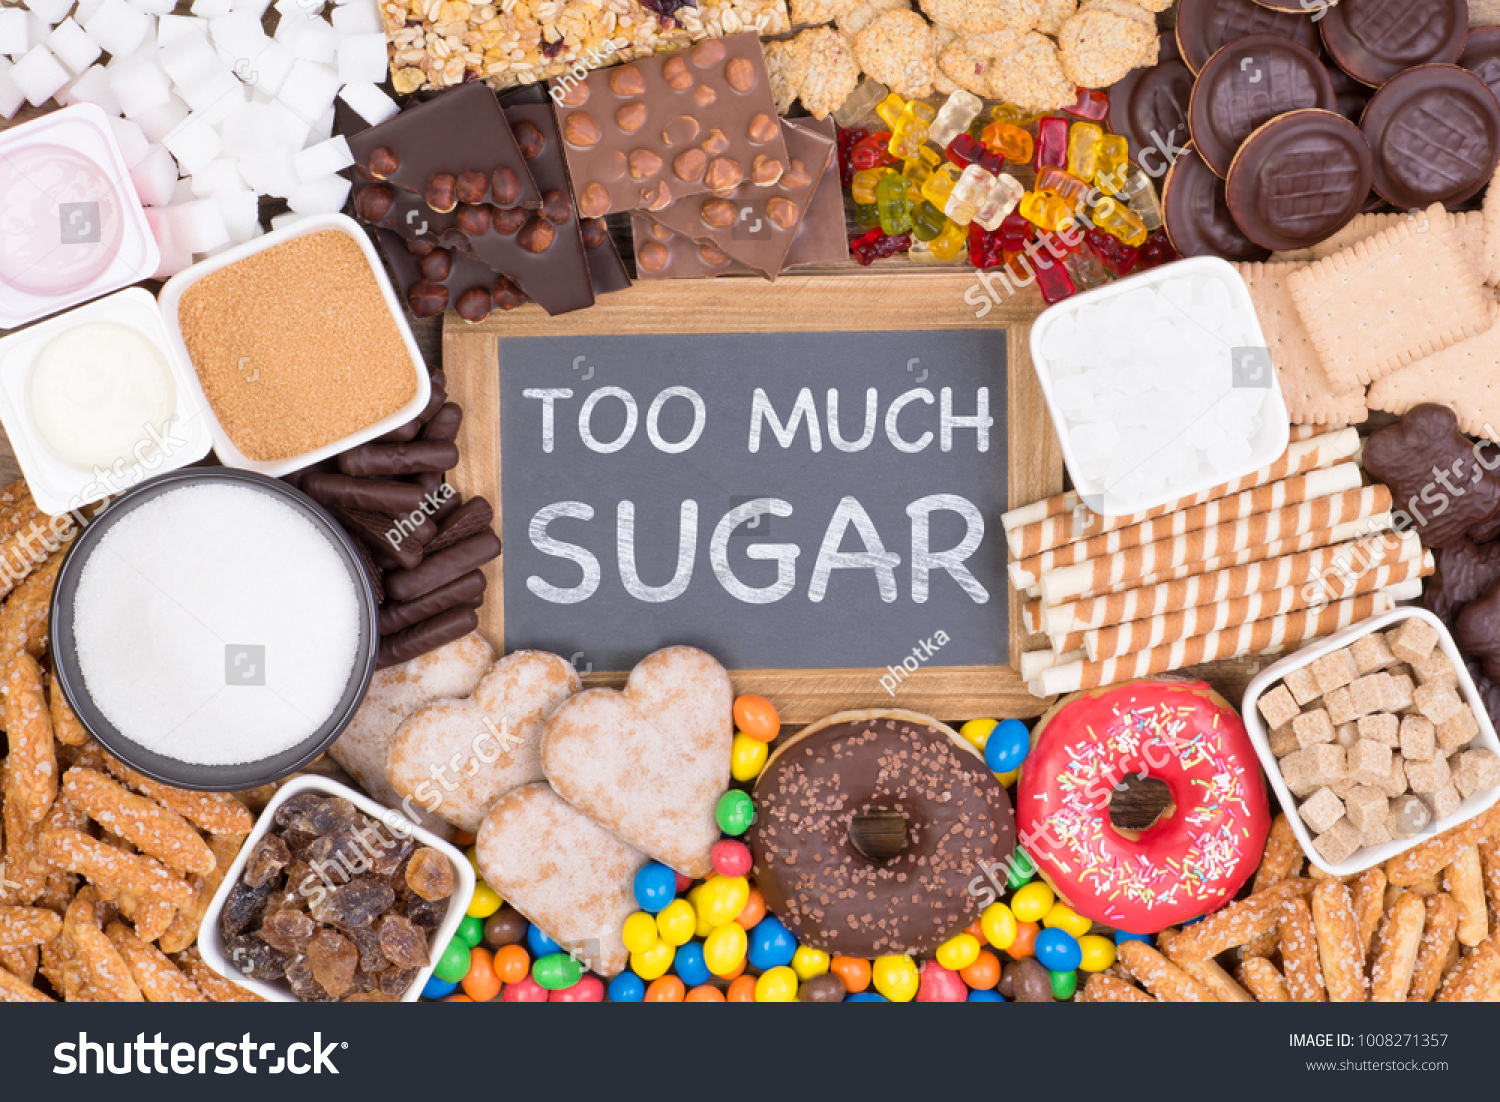 Food containing too much sugar. Sugar in diet causes obesity, diabetes and other health problems #1008271357